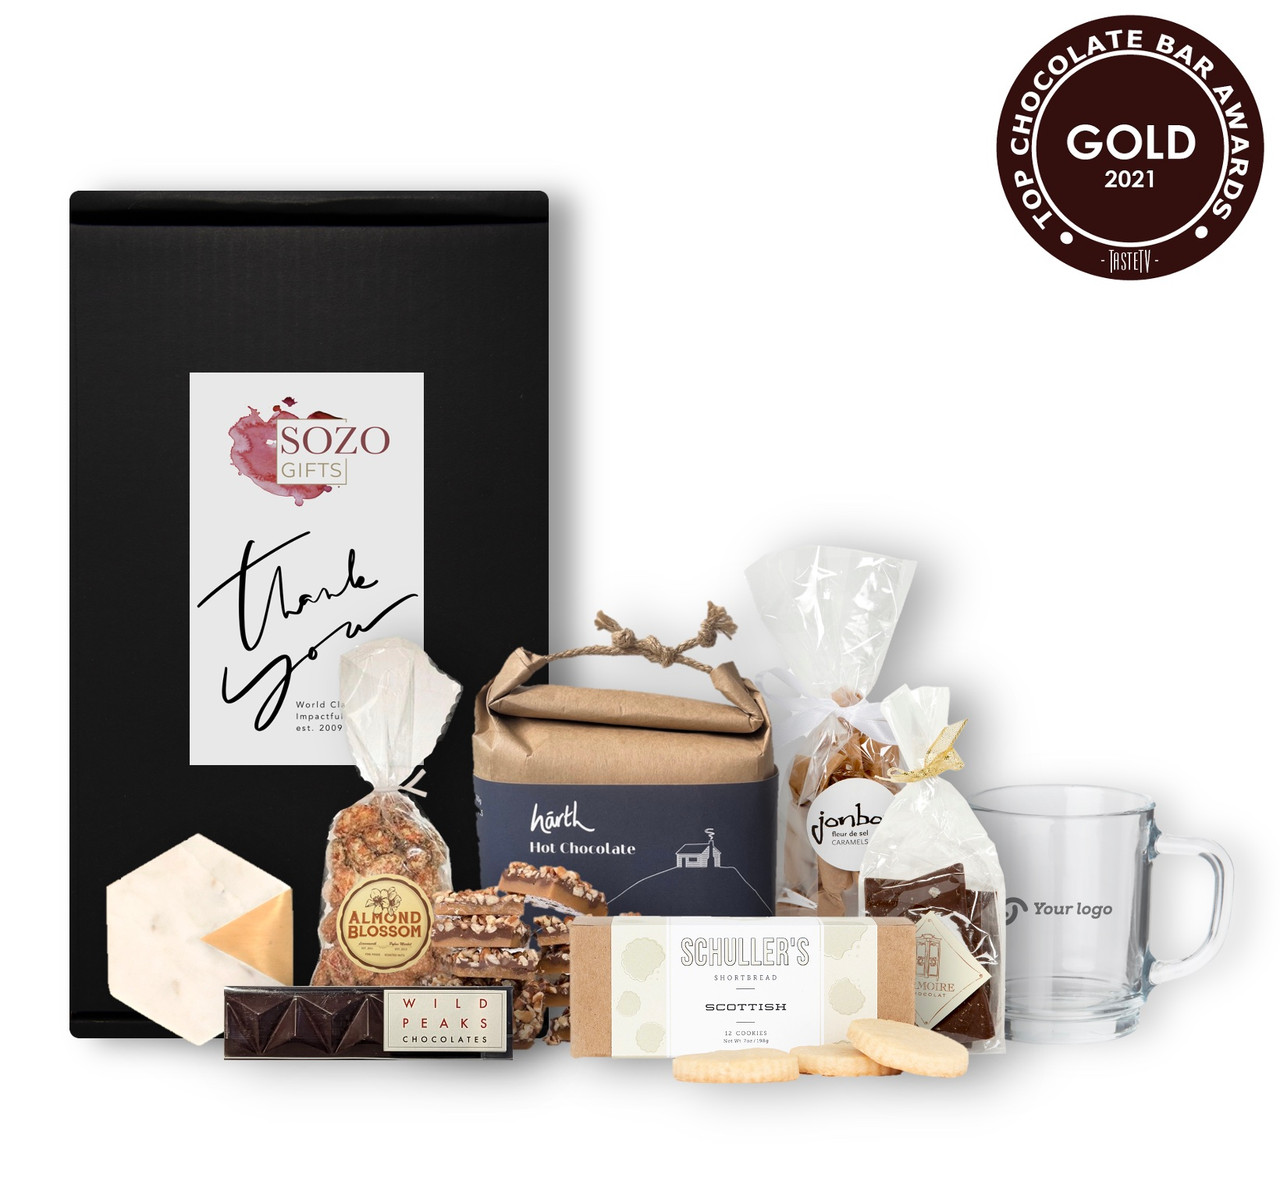 https://cdn11.bigcommerce.com/s-kgihy4hax9/images/stencil/1280w/products/309/1044/Sozo_Gifts_Complete_Artisan_Sweets_x_Harth_Chocolate_Gift_Box-2__07303.1667237841.jpg